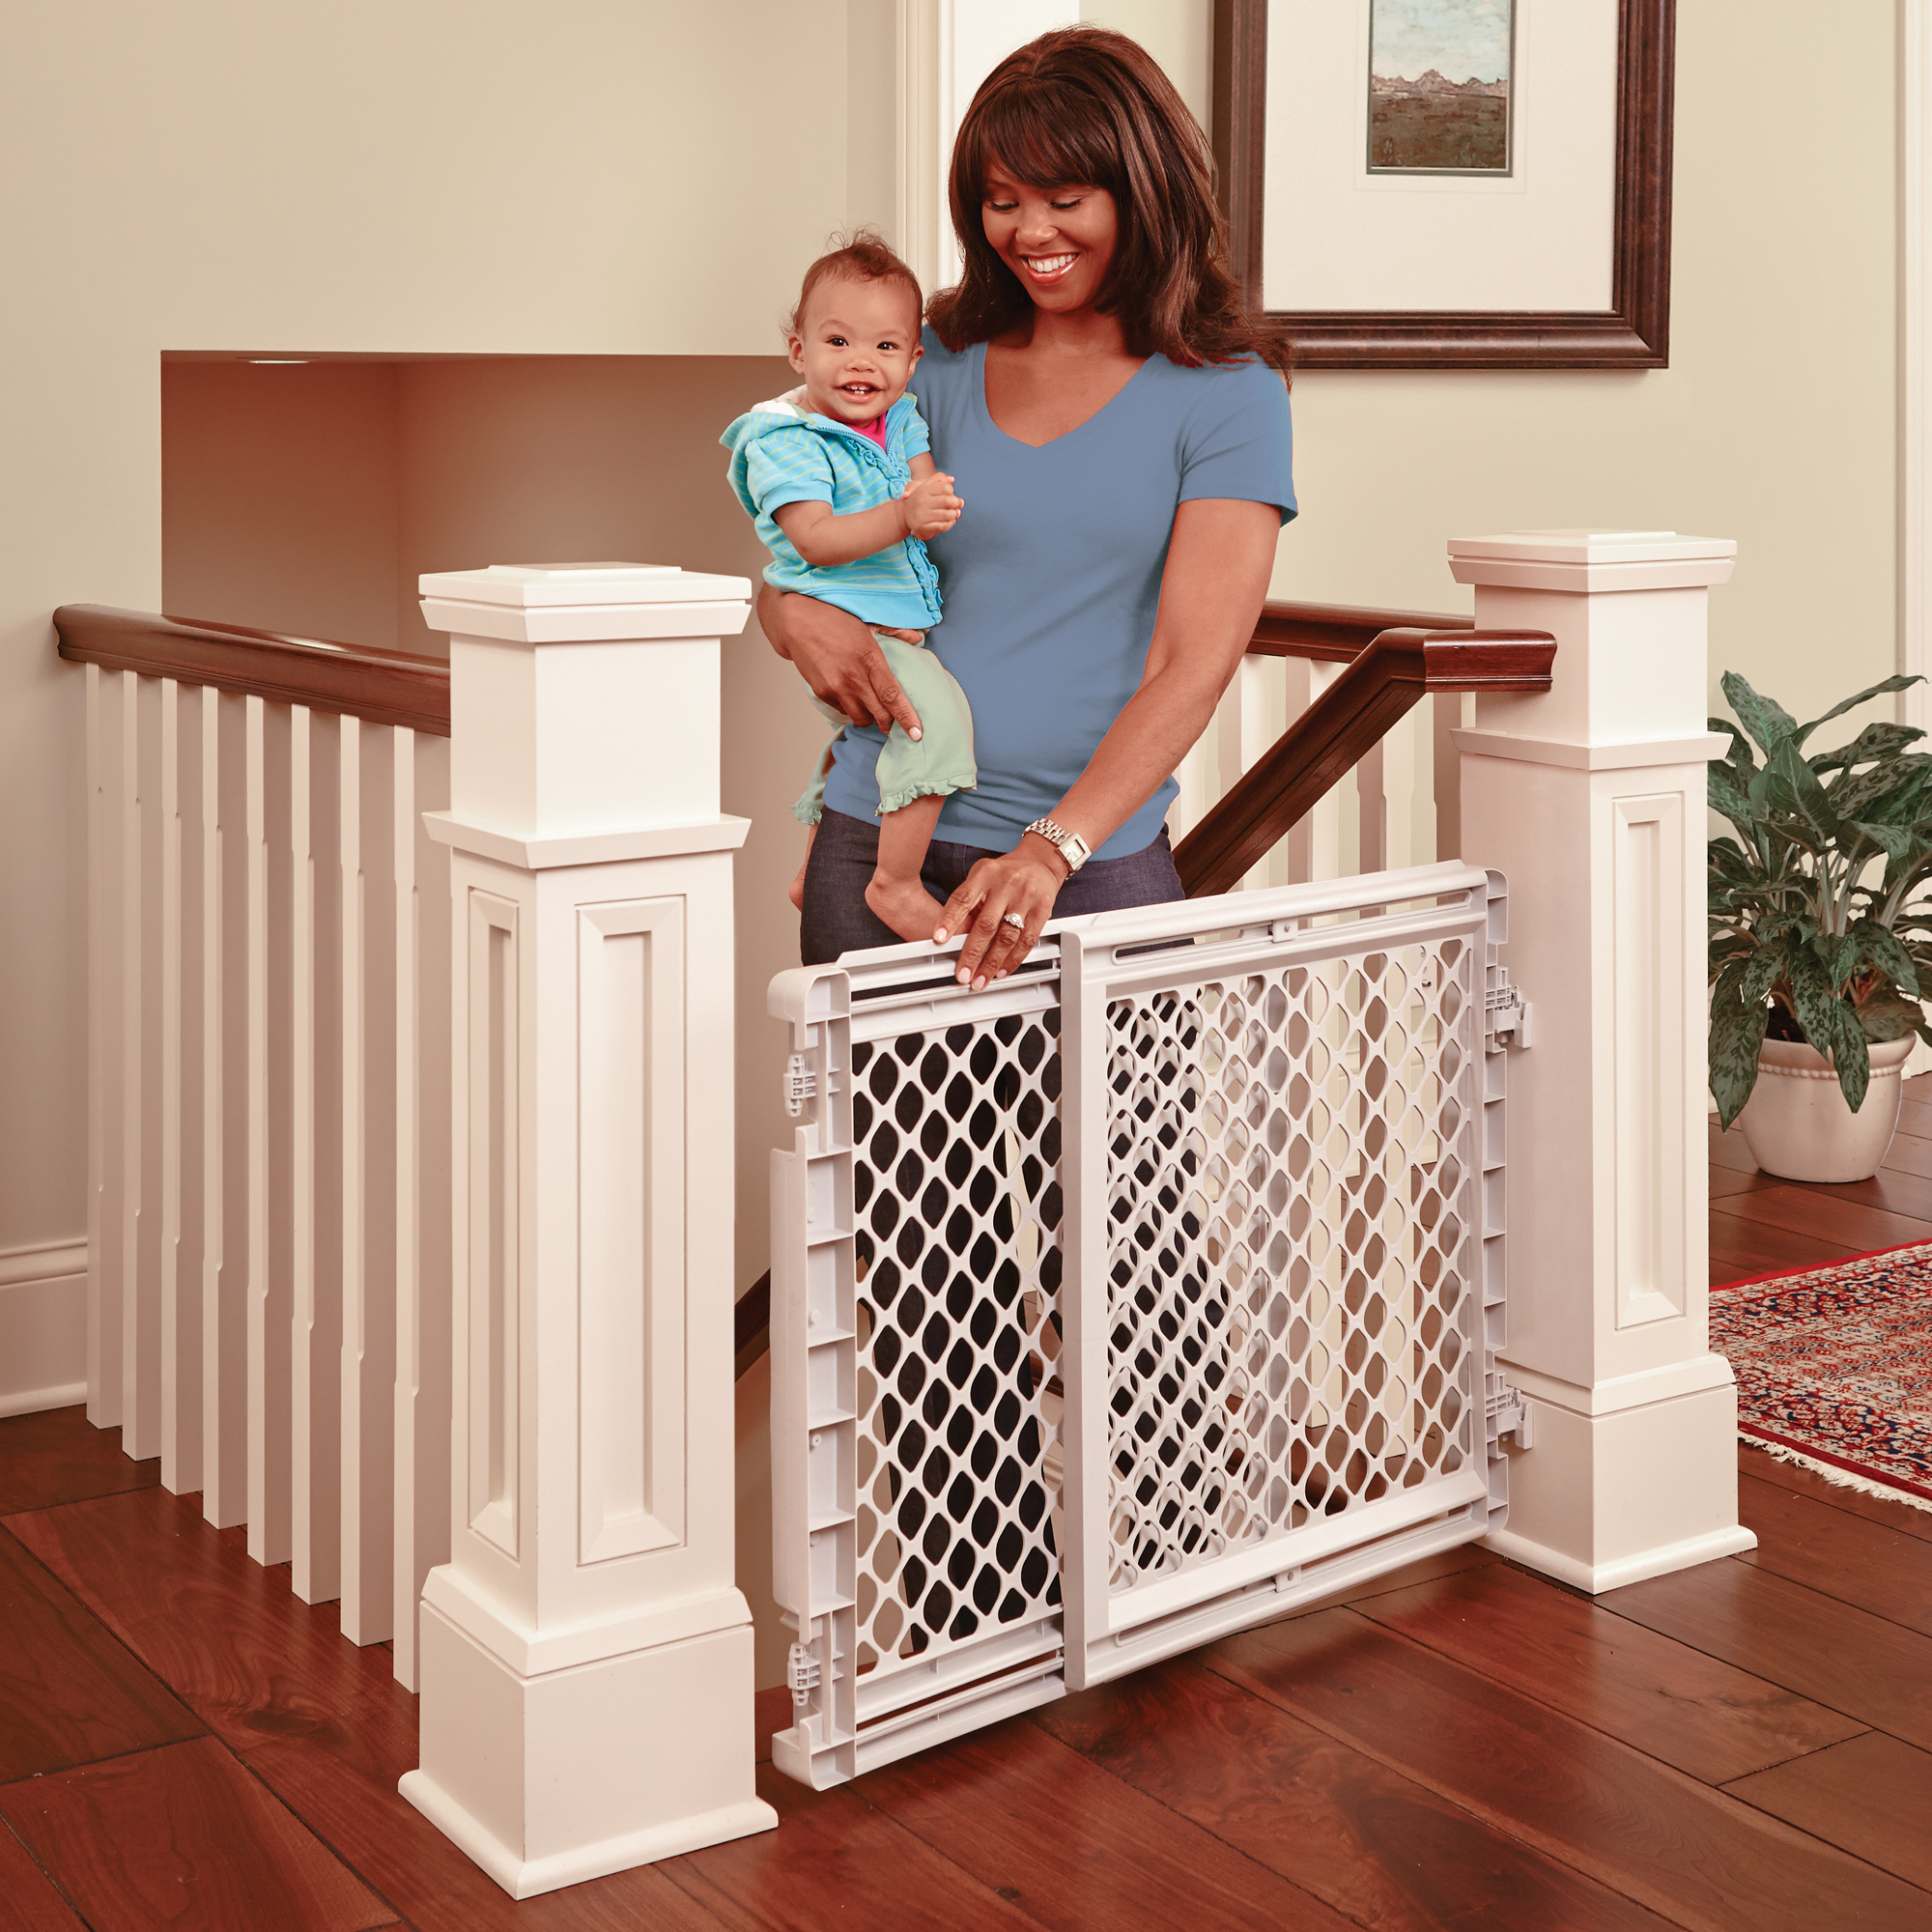 Toddleroo by North States 27"- 41" Stairway Baby Safety Gate, Light Gray - image 1 of 6